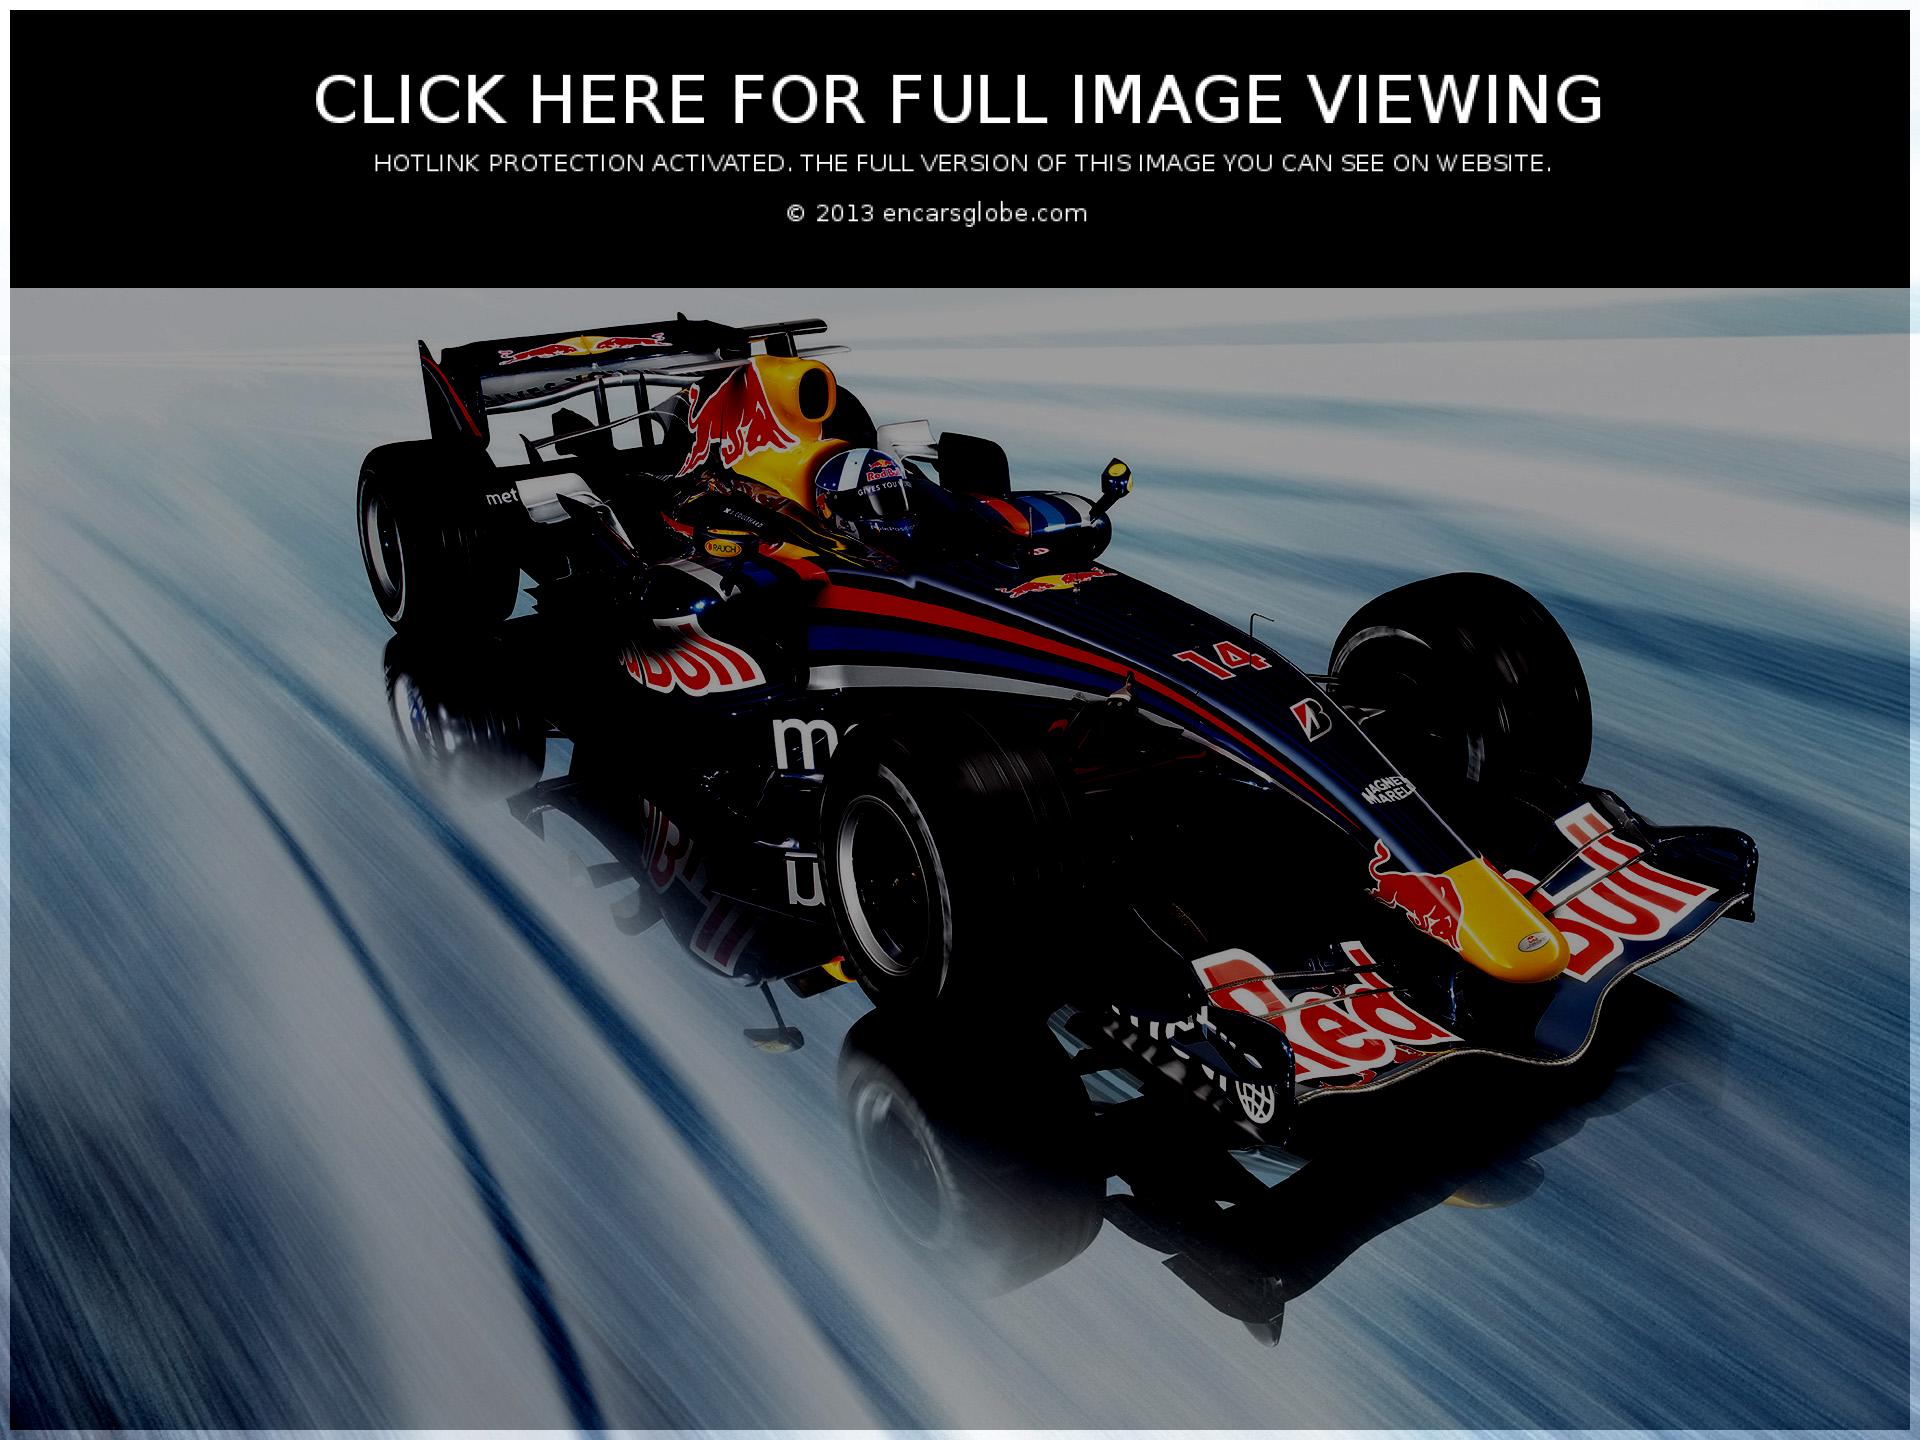 Red Bull Red Bull-Renault F1 Photo Gallery: Photo #04 out of 11 ...